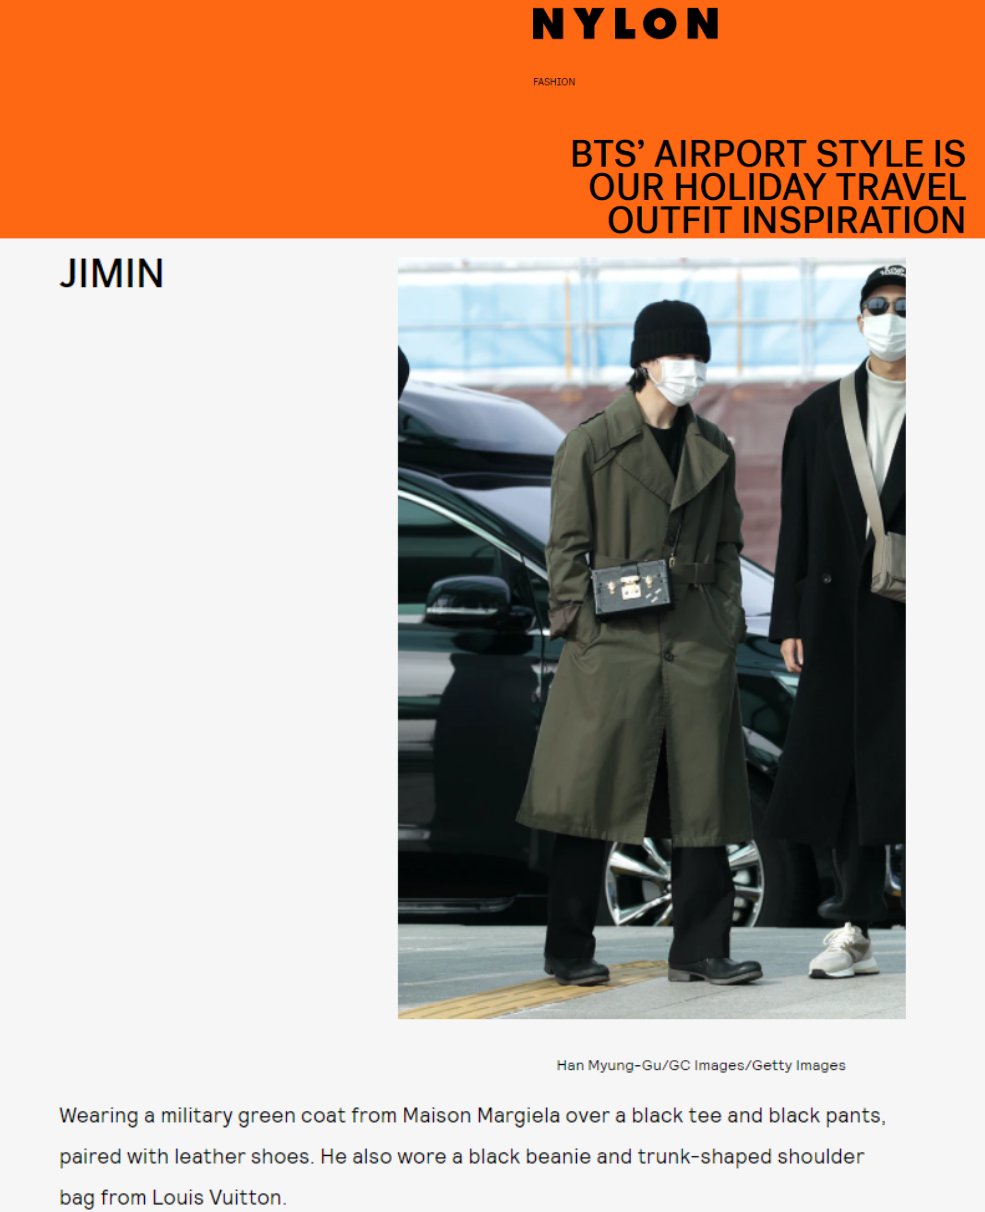 JIMIN DATA on X: American lifestyle and entertainment magazine Nylon  discussed the latest airport fashion worn by Jimin and BTS. Nylon praised  the choice of 'power coats', with Jimin wearing a military